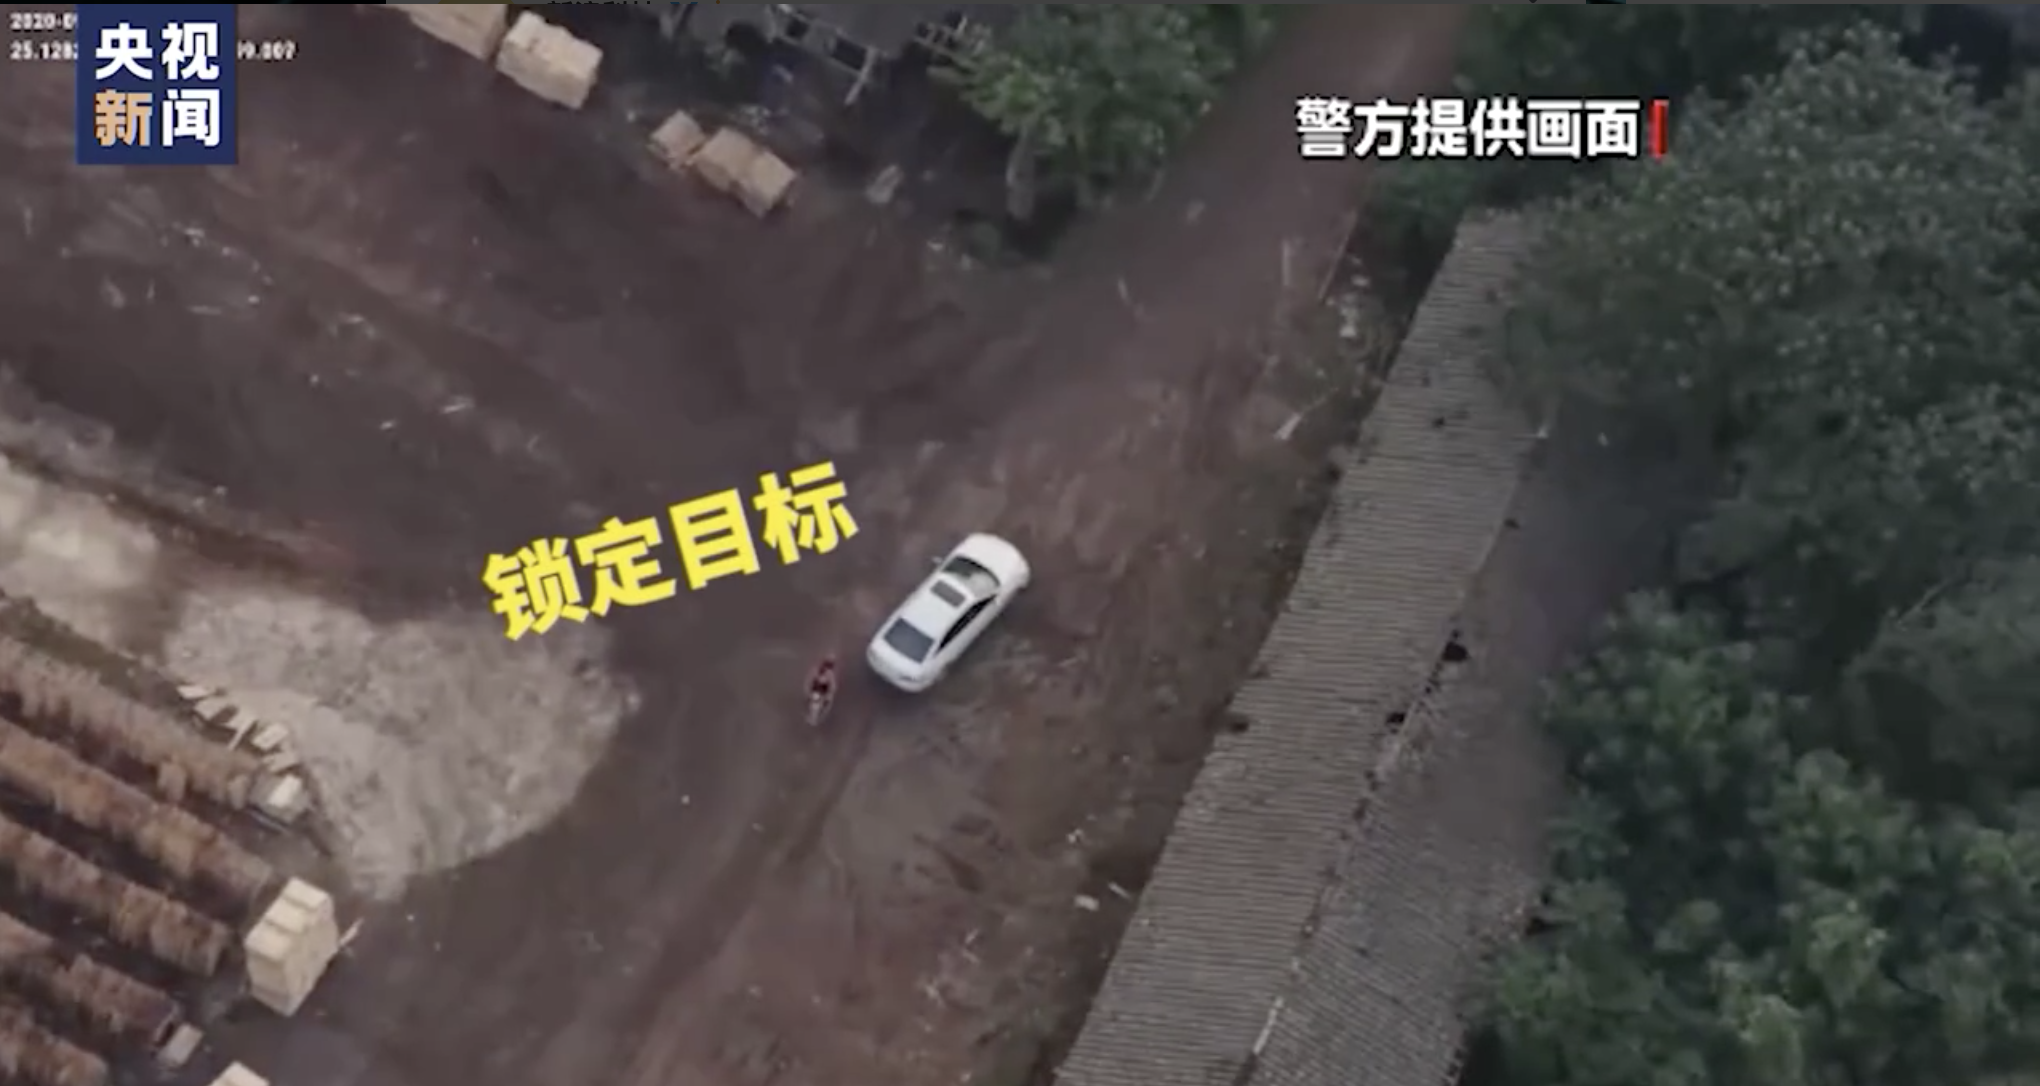 Drone footage supplied by police in the southern city of Guilin shows authorities trailing a suspected drug dealer. Image: Handout via CCTV